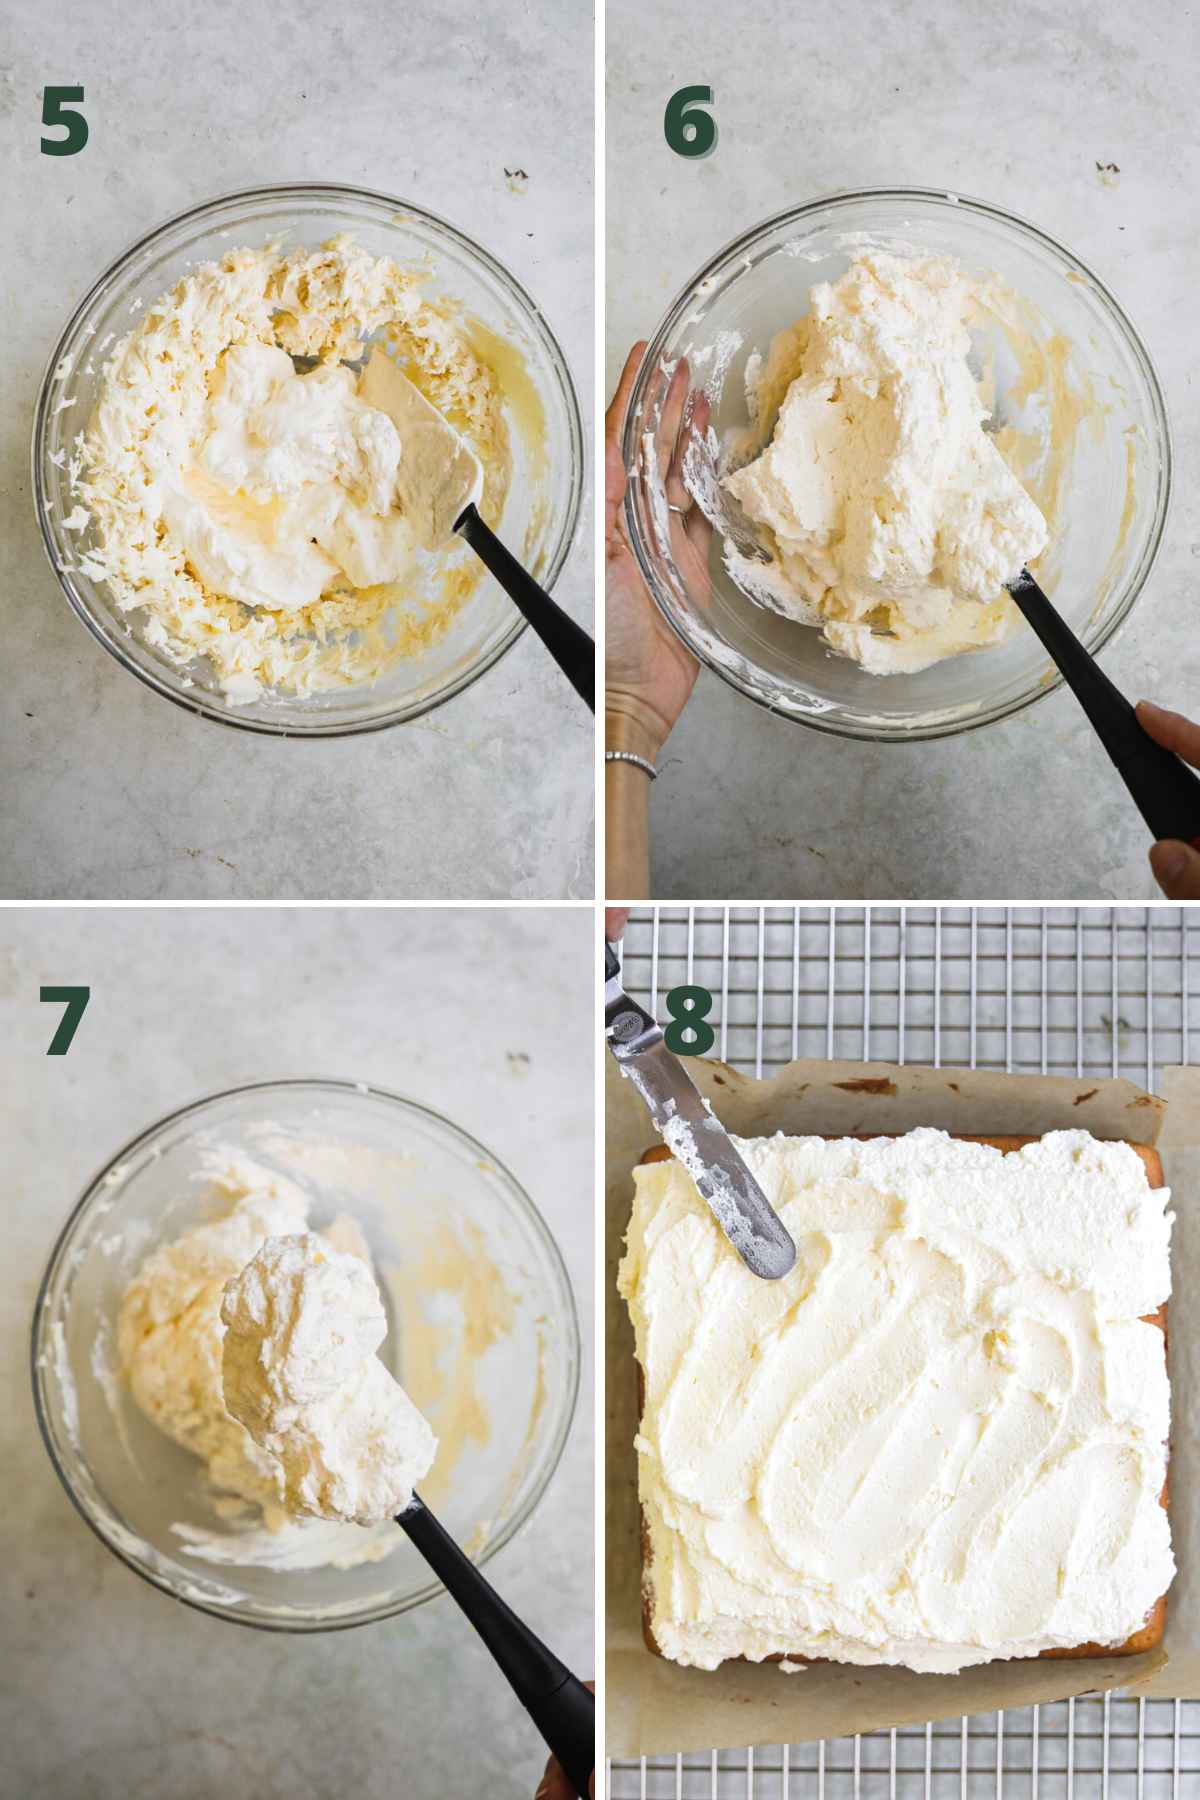 Steps to make homemade vanilla mascarpone frosting, fold whipped cream in mascarpone until combined, then use for cakes, cupcakes, desserts, and more.